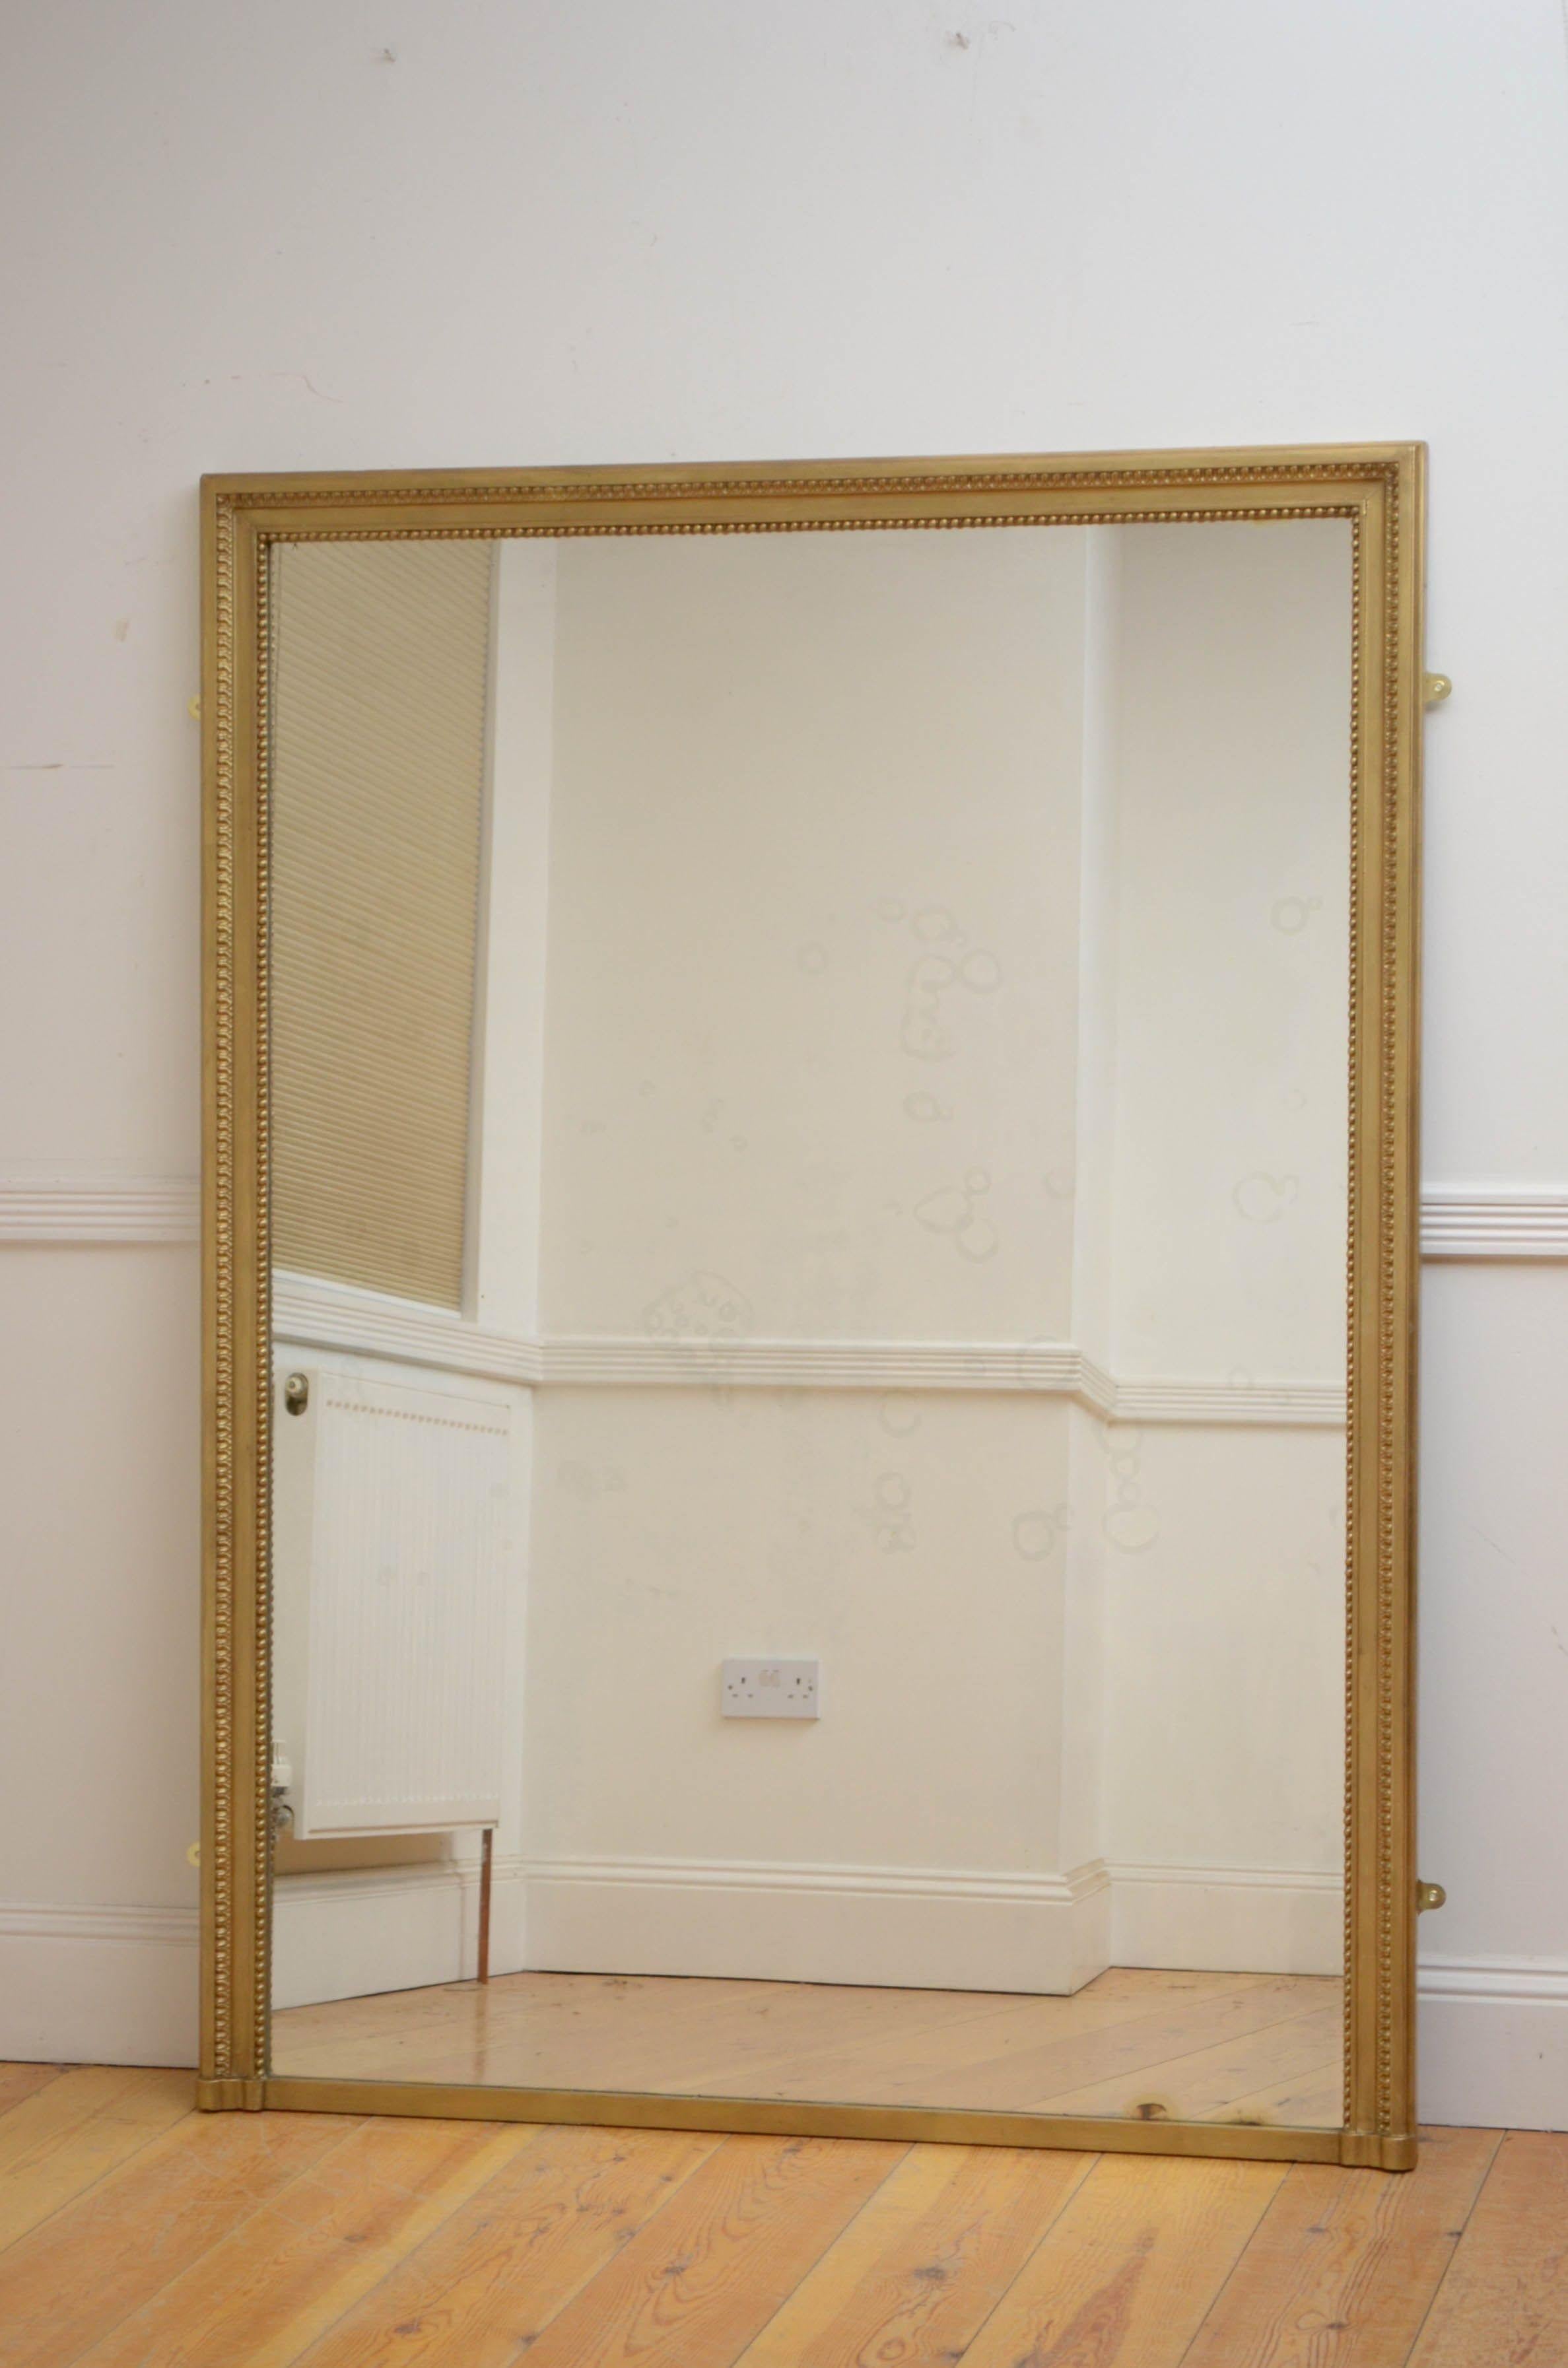 Sn5136 Simple and elegant 19th century French wall mirror, having original glass with some imperfections in molded gold frame. This antique mirror is in home ready condition. c 1900

Measures: H 65